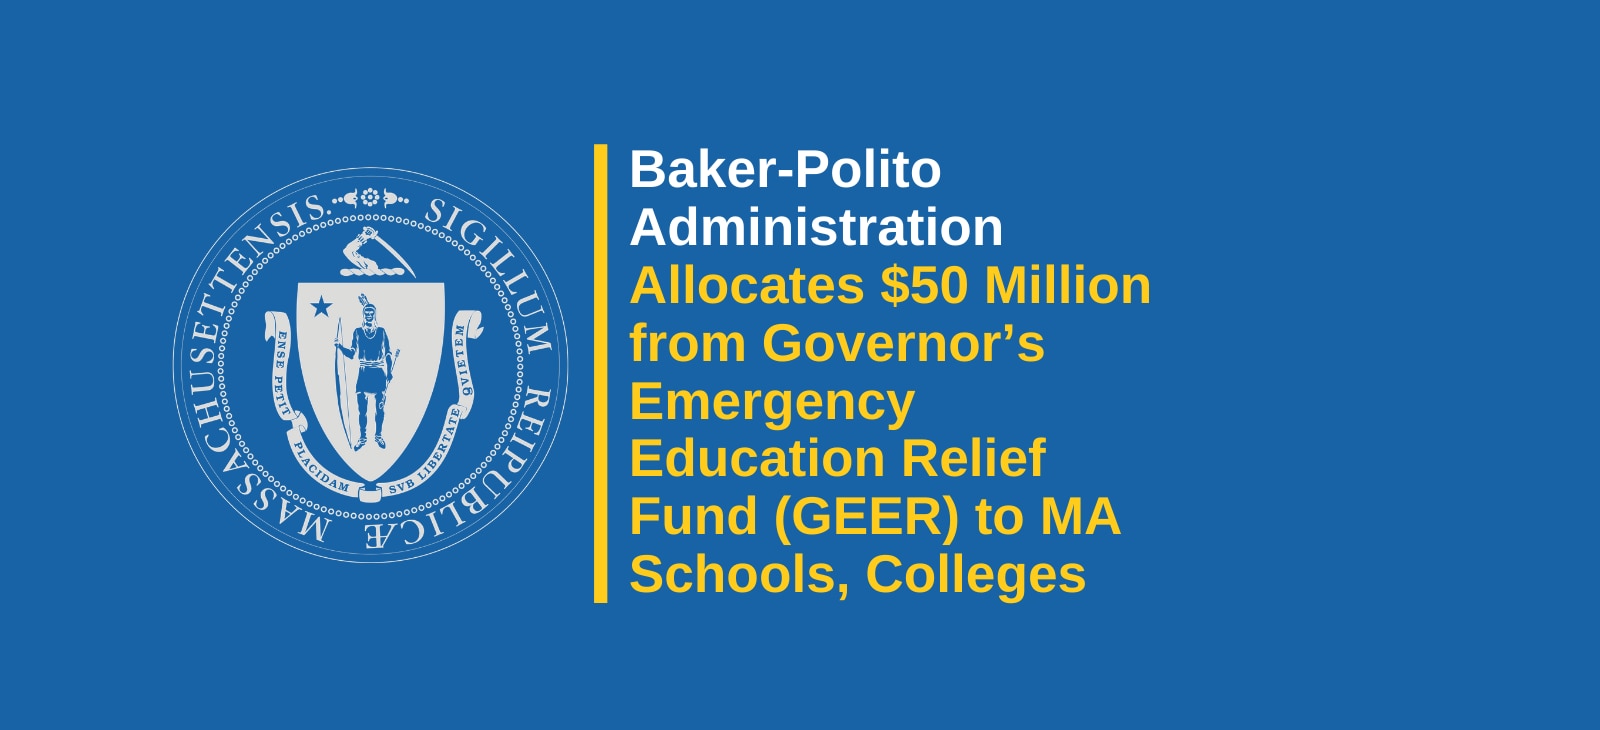 Baker-Polito Administration Allocates $50 Million from the Governor’s Emergency Education Relief (GEER) Fund to Schools and Colleges Across the Commonwealth